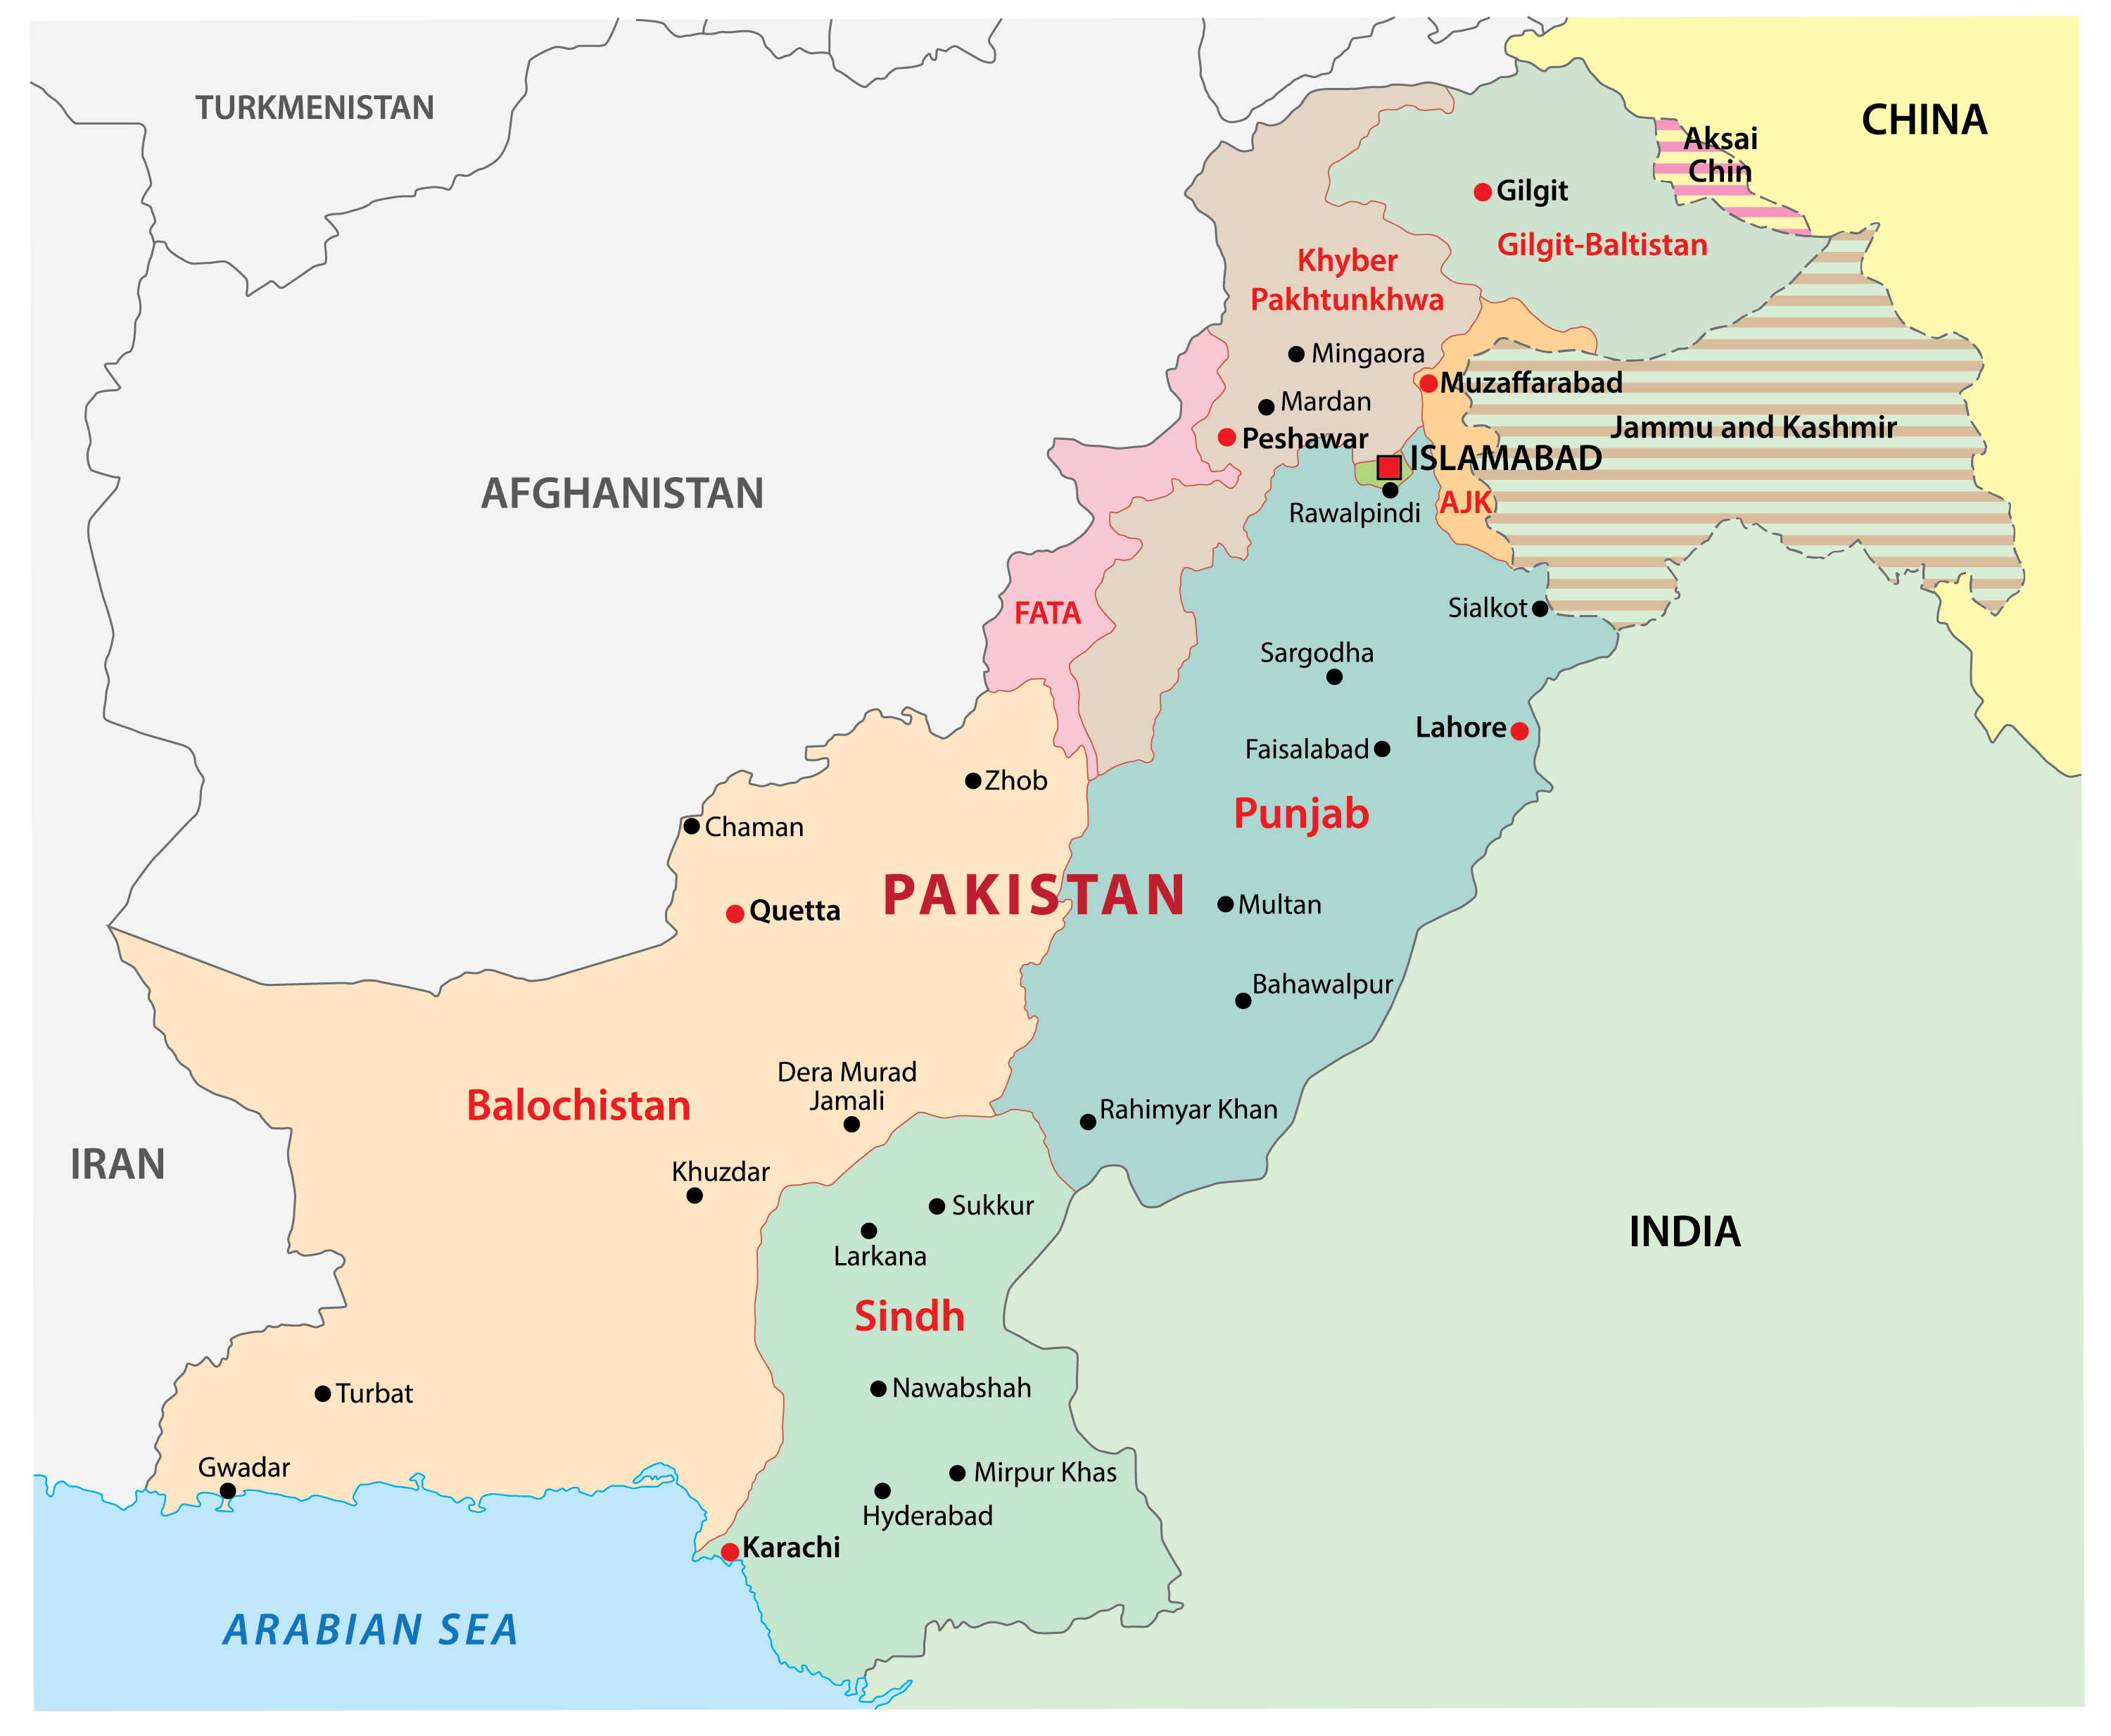 WBBSE Notes For Class 8 Geography Chapter 8 Some Neighbouring Countries Of India Map Of Pakistan